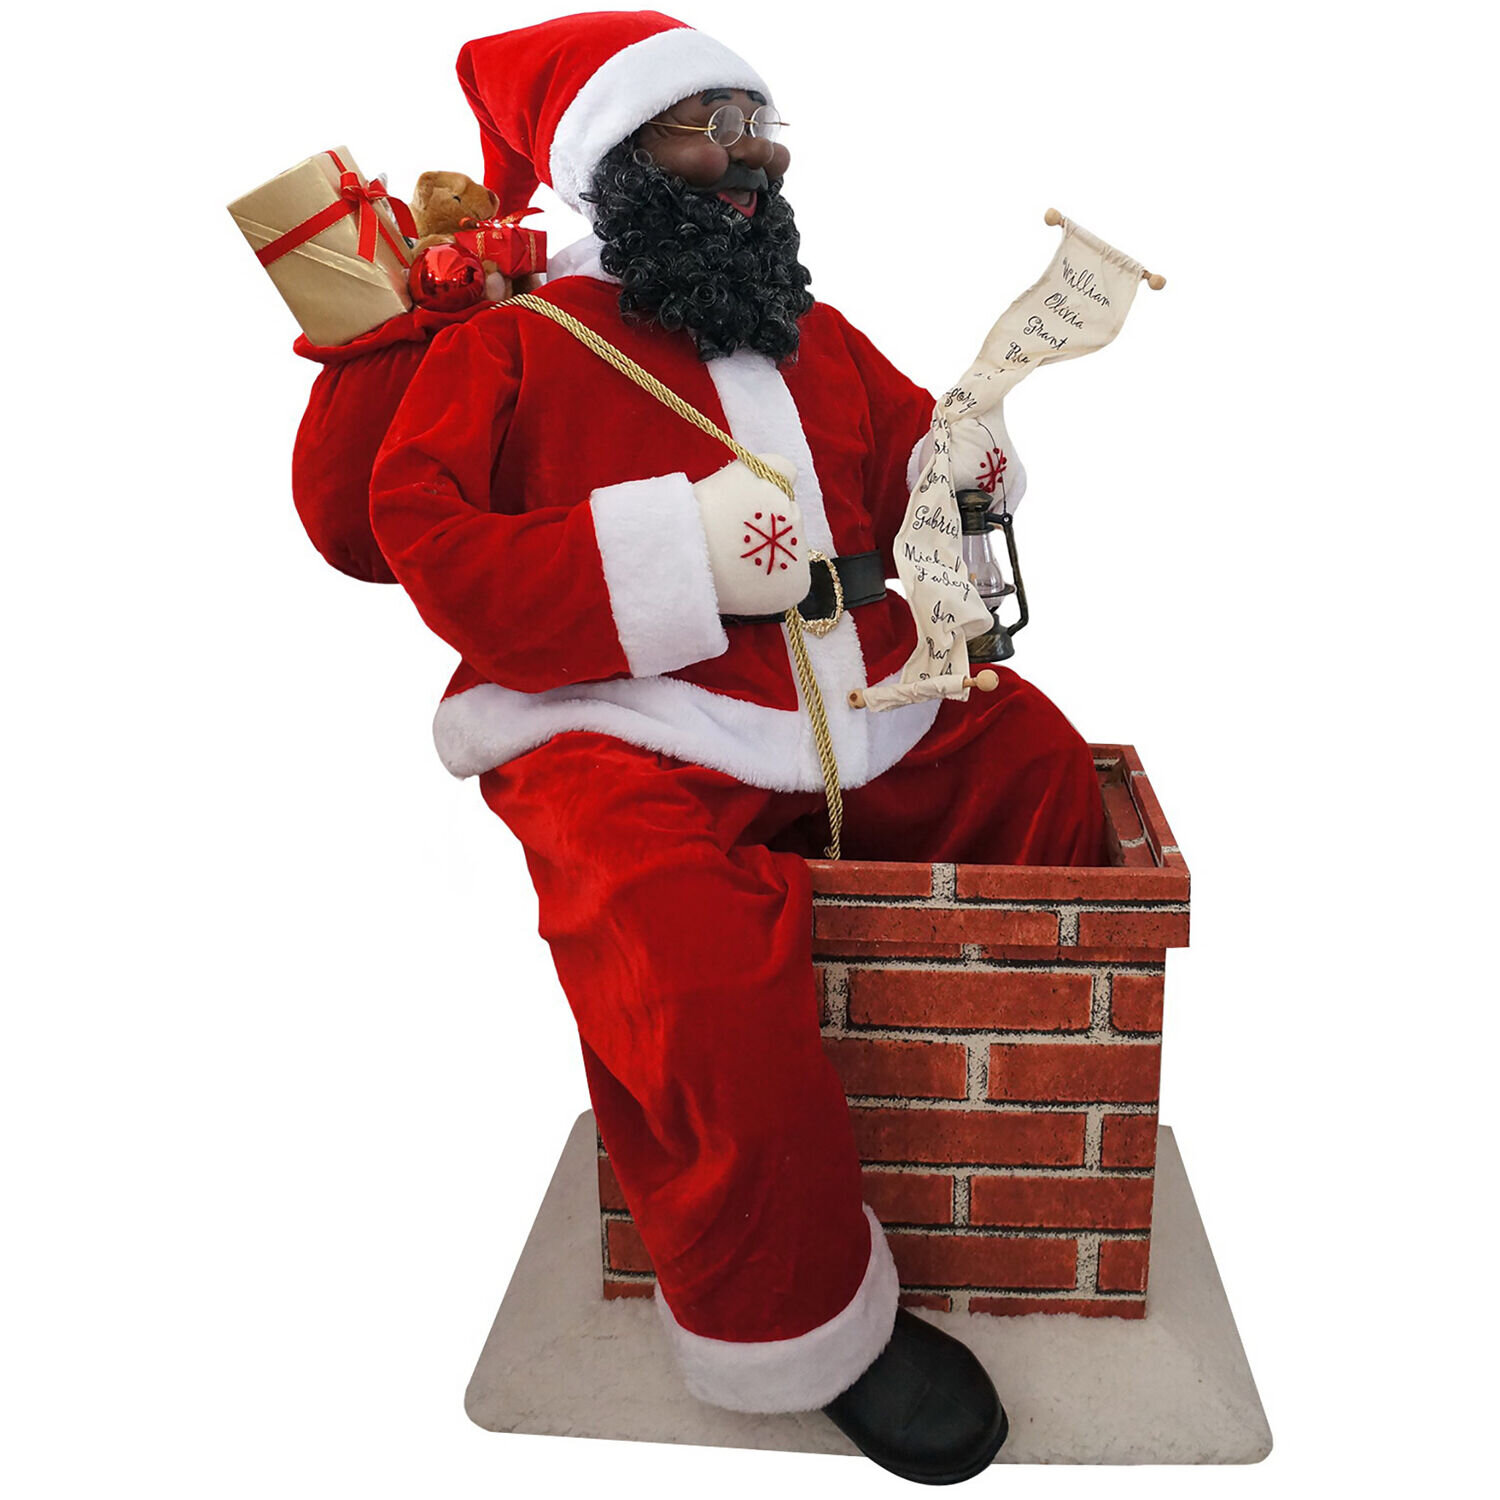 How Does Santa Claus Get Into A House Without A Chimney